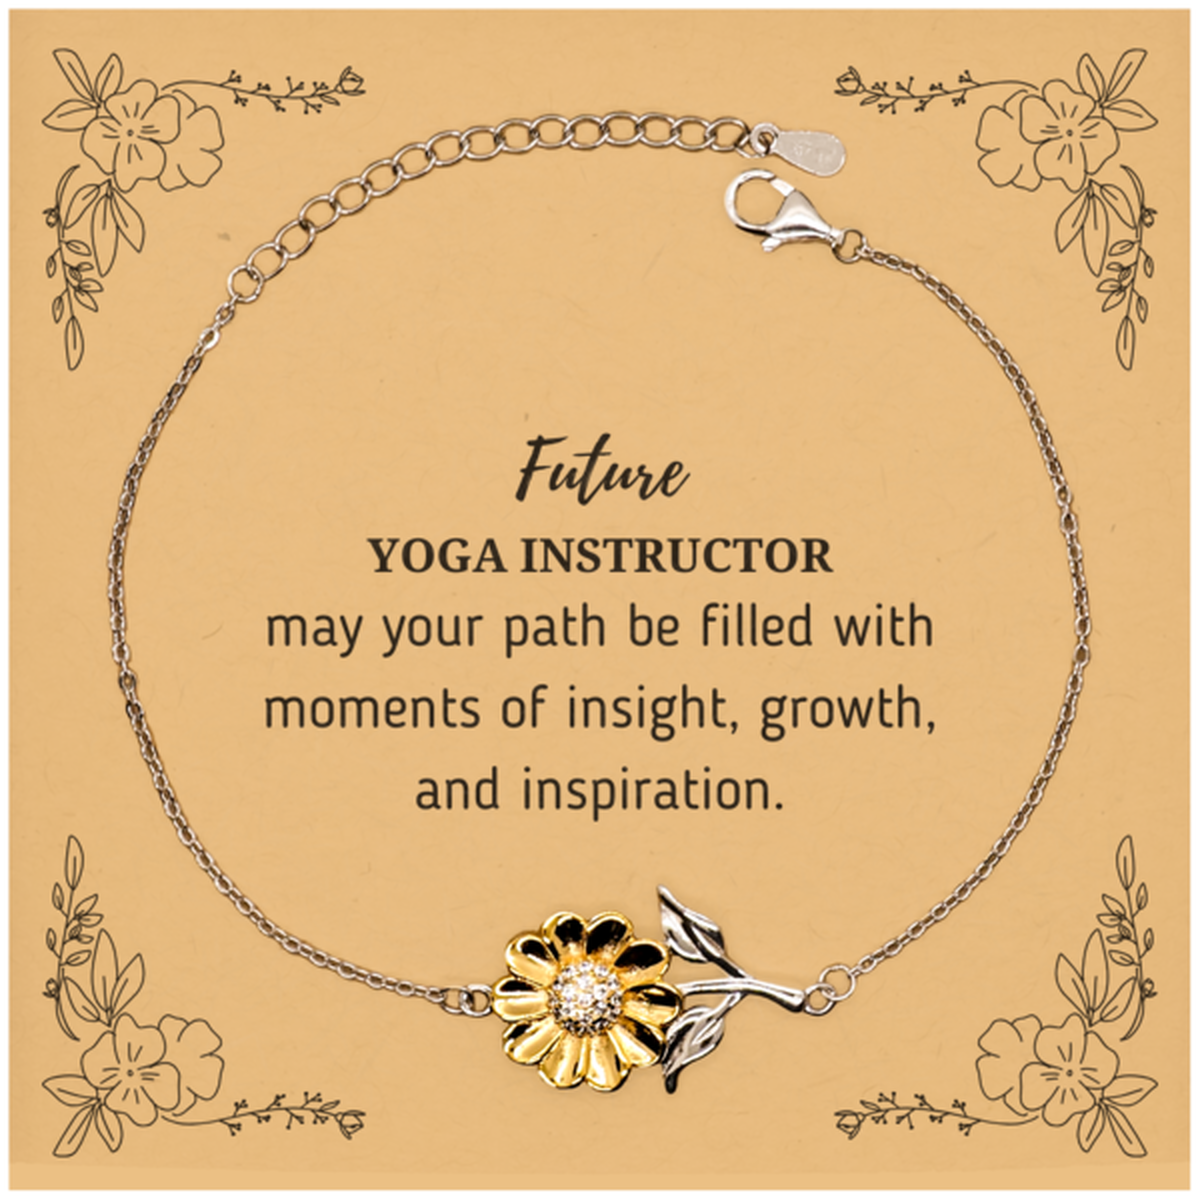 Future Yoga Instructor Gifts, May your path be filled with moments of insight, Graduation Gifts for New Yoga Instructor, Christmas Unique Sunflower Bracelet For Men, Women, Friends